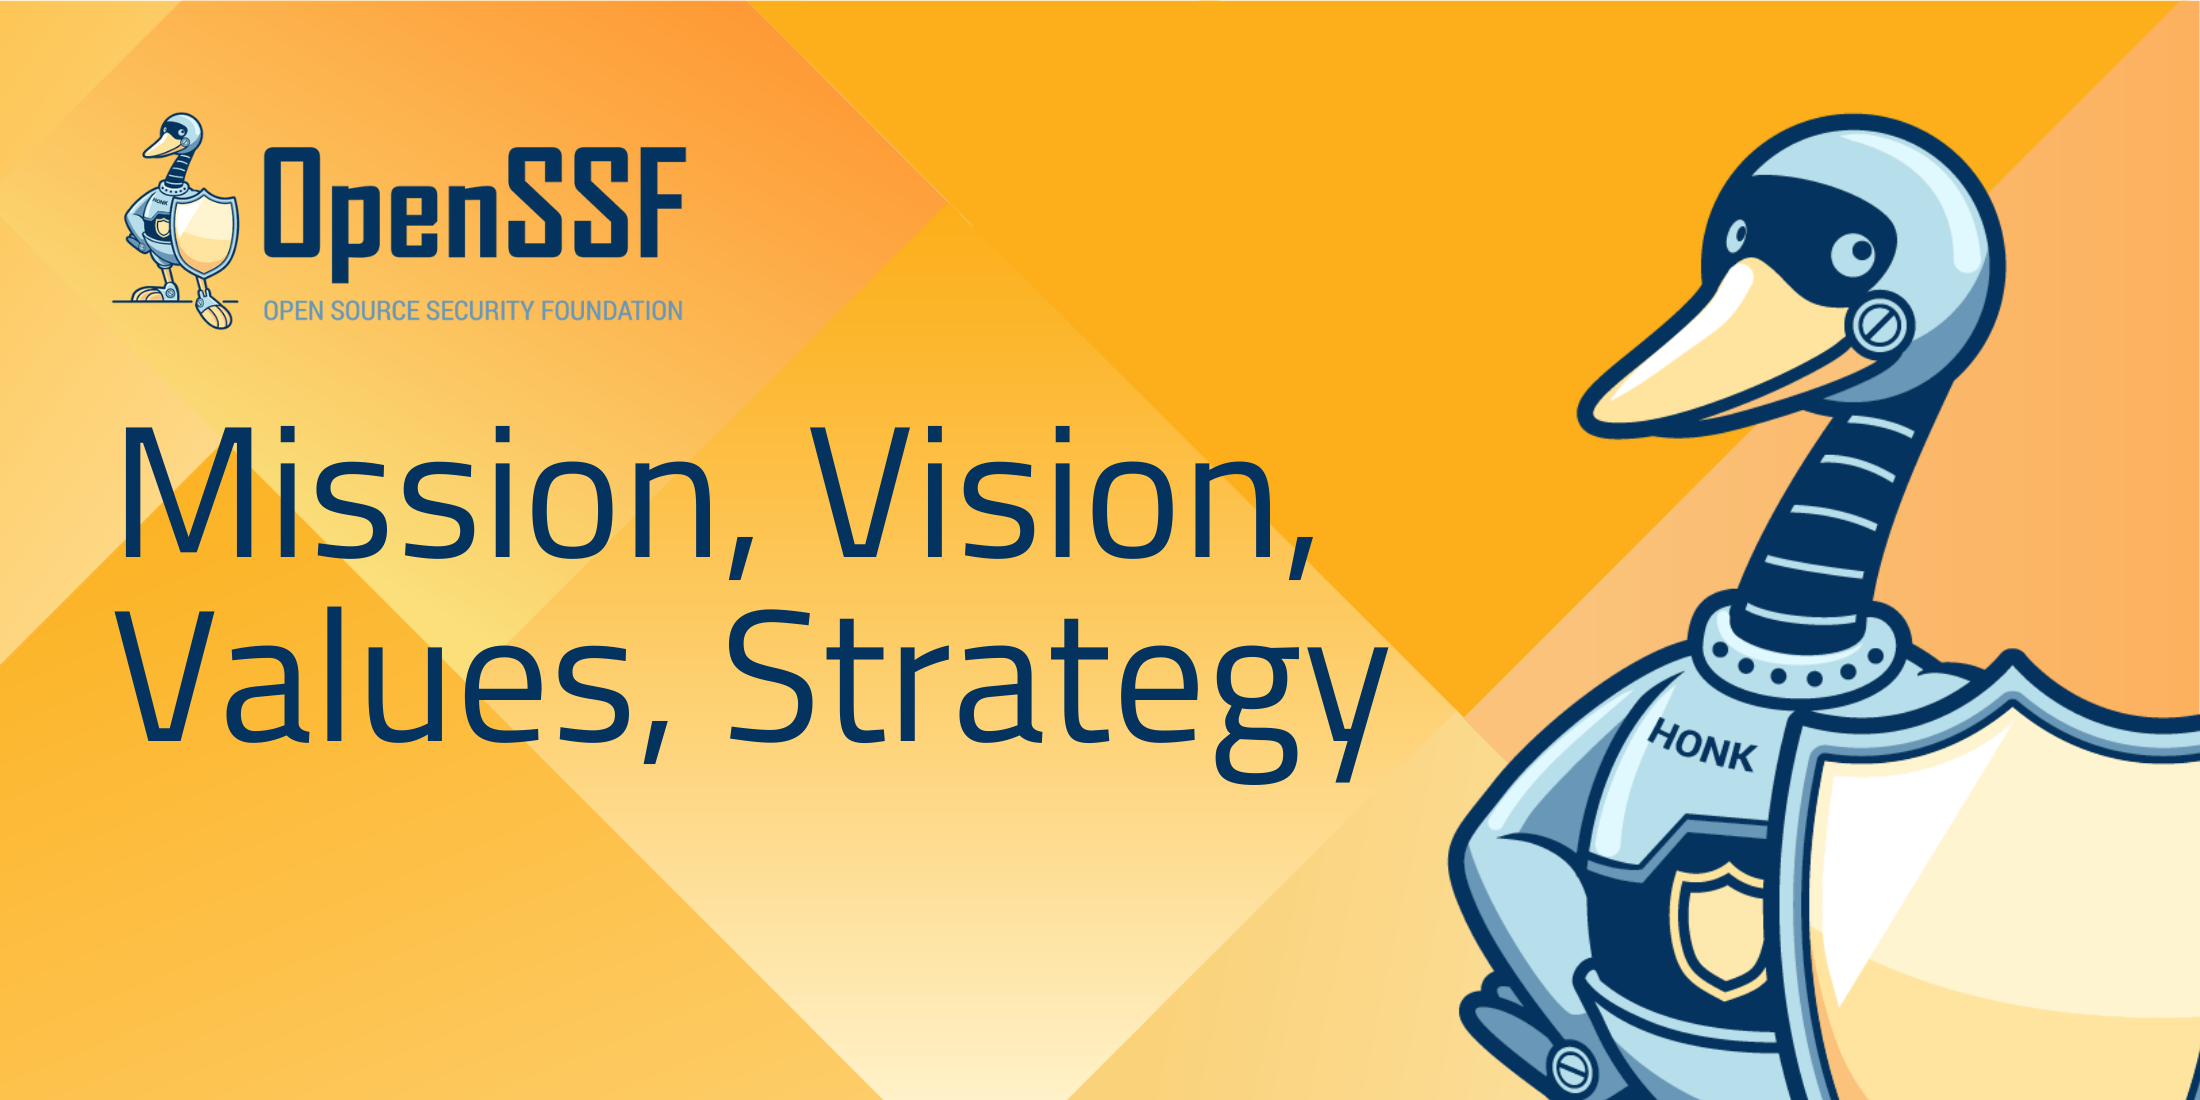 OpenSSF Mission Vision Values Strategy